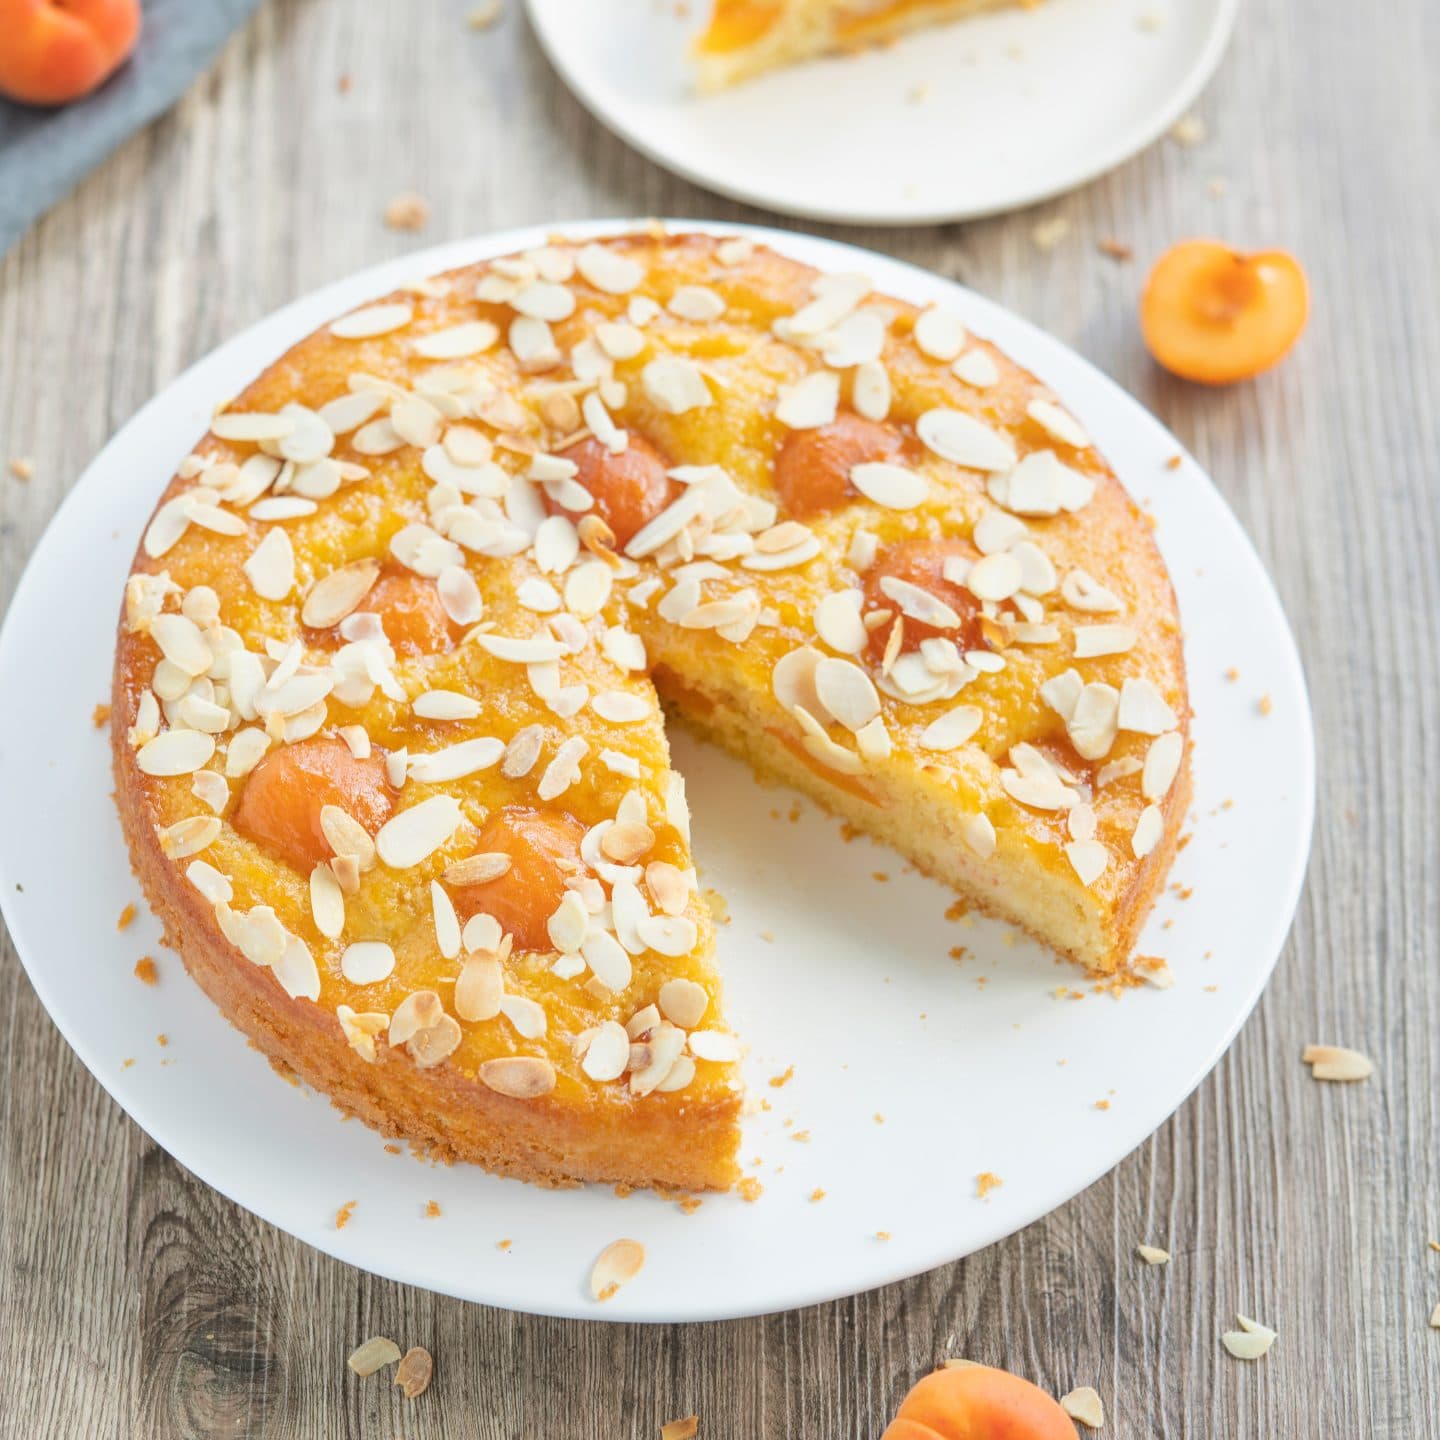 apricot and almond cake / DELICIOUS BITES